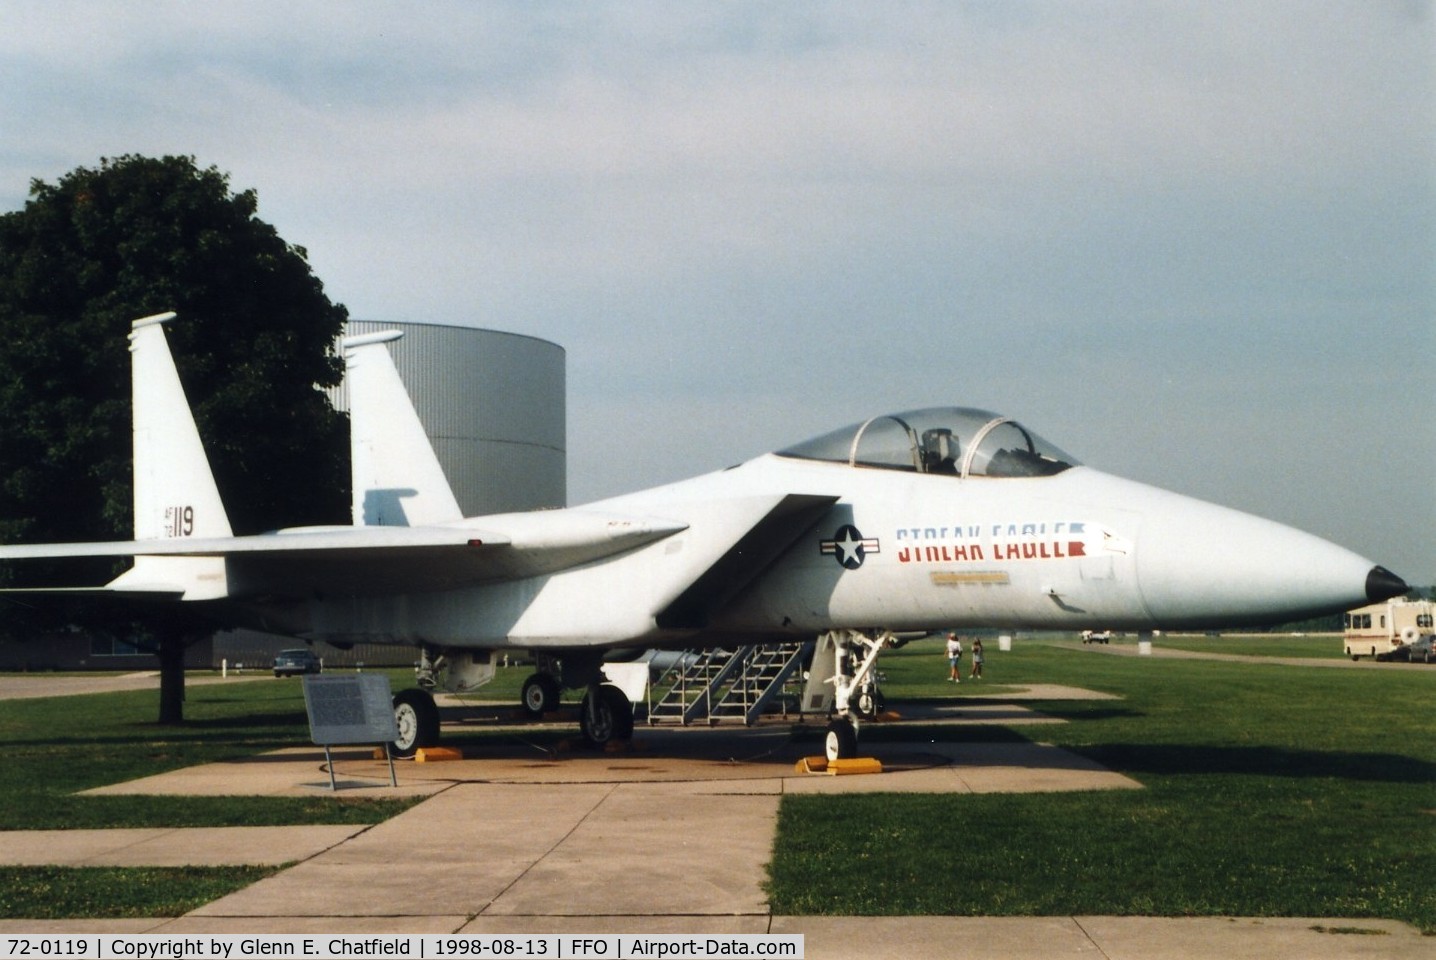 72-0119, McDonnell Douglas F-15A Eagle C/N 0019/A017, F-15A at the National Museum of the U.S. Air Force